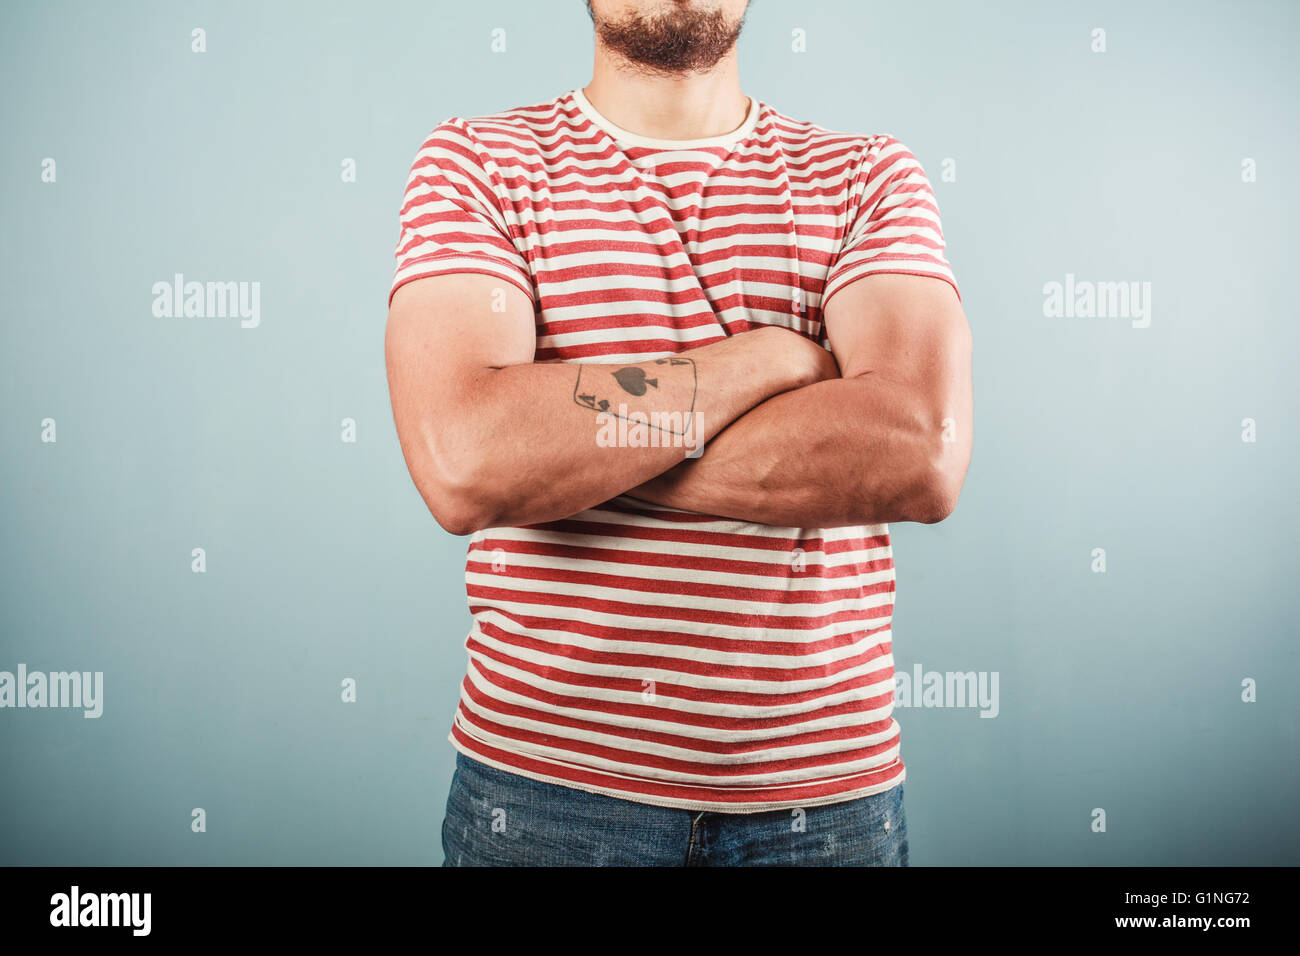 A young man with a tattoo is wearing a striped shirt and standing with his arms crossed Stock Photo